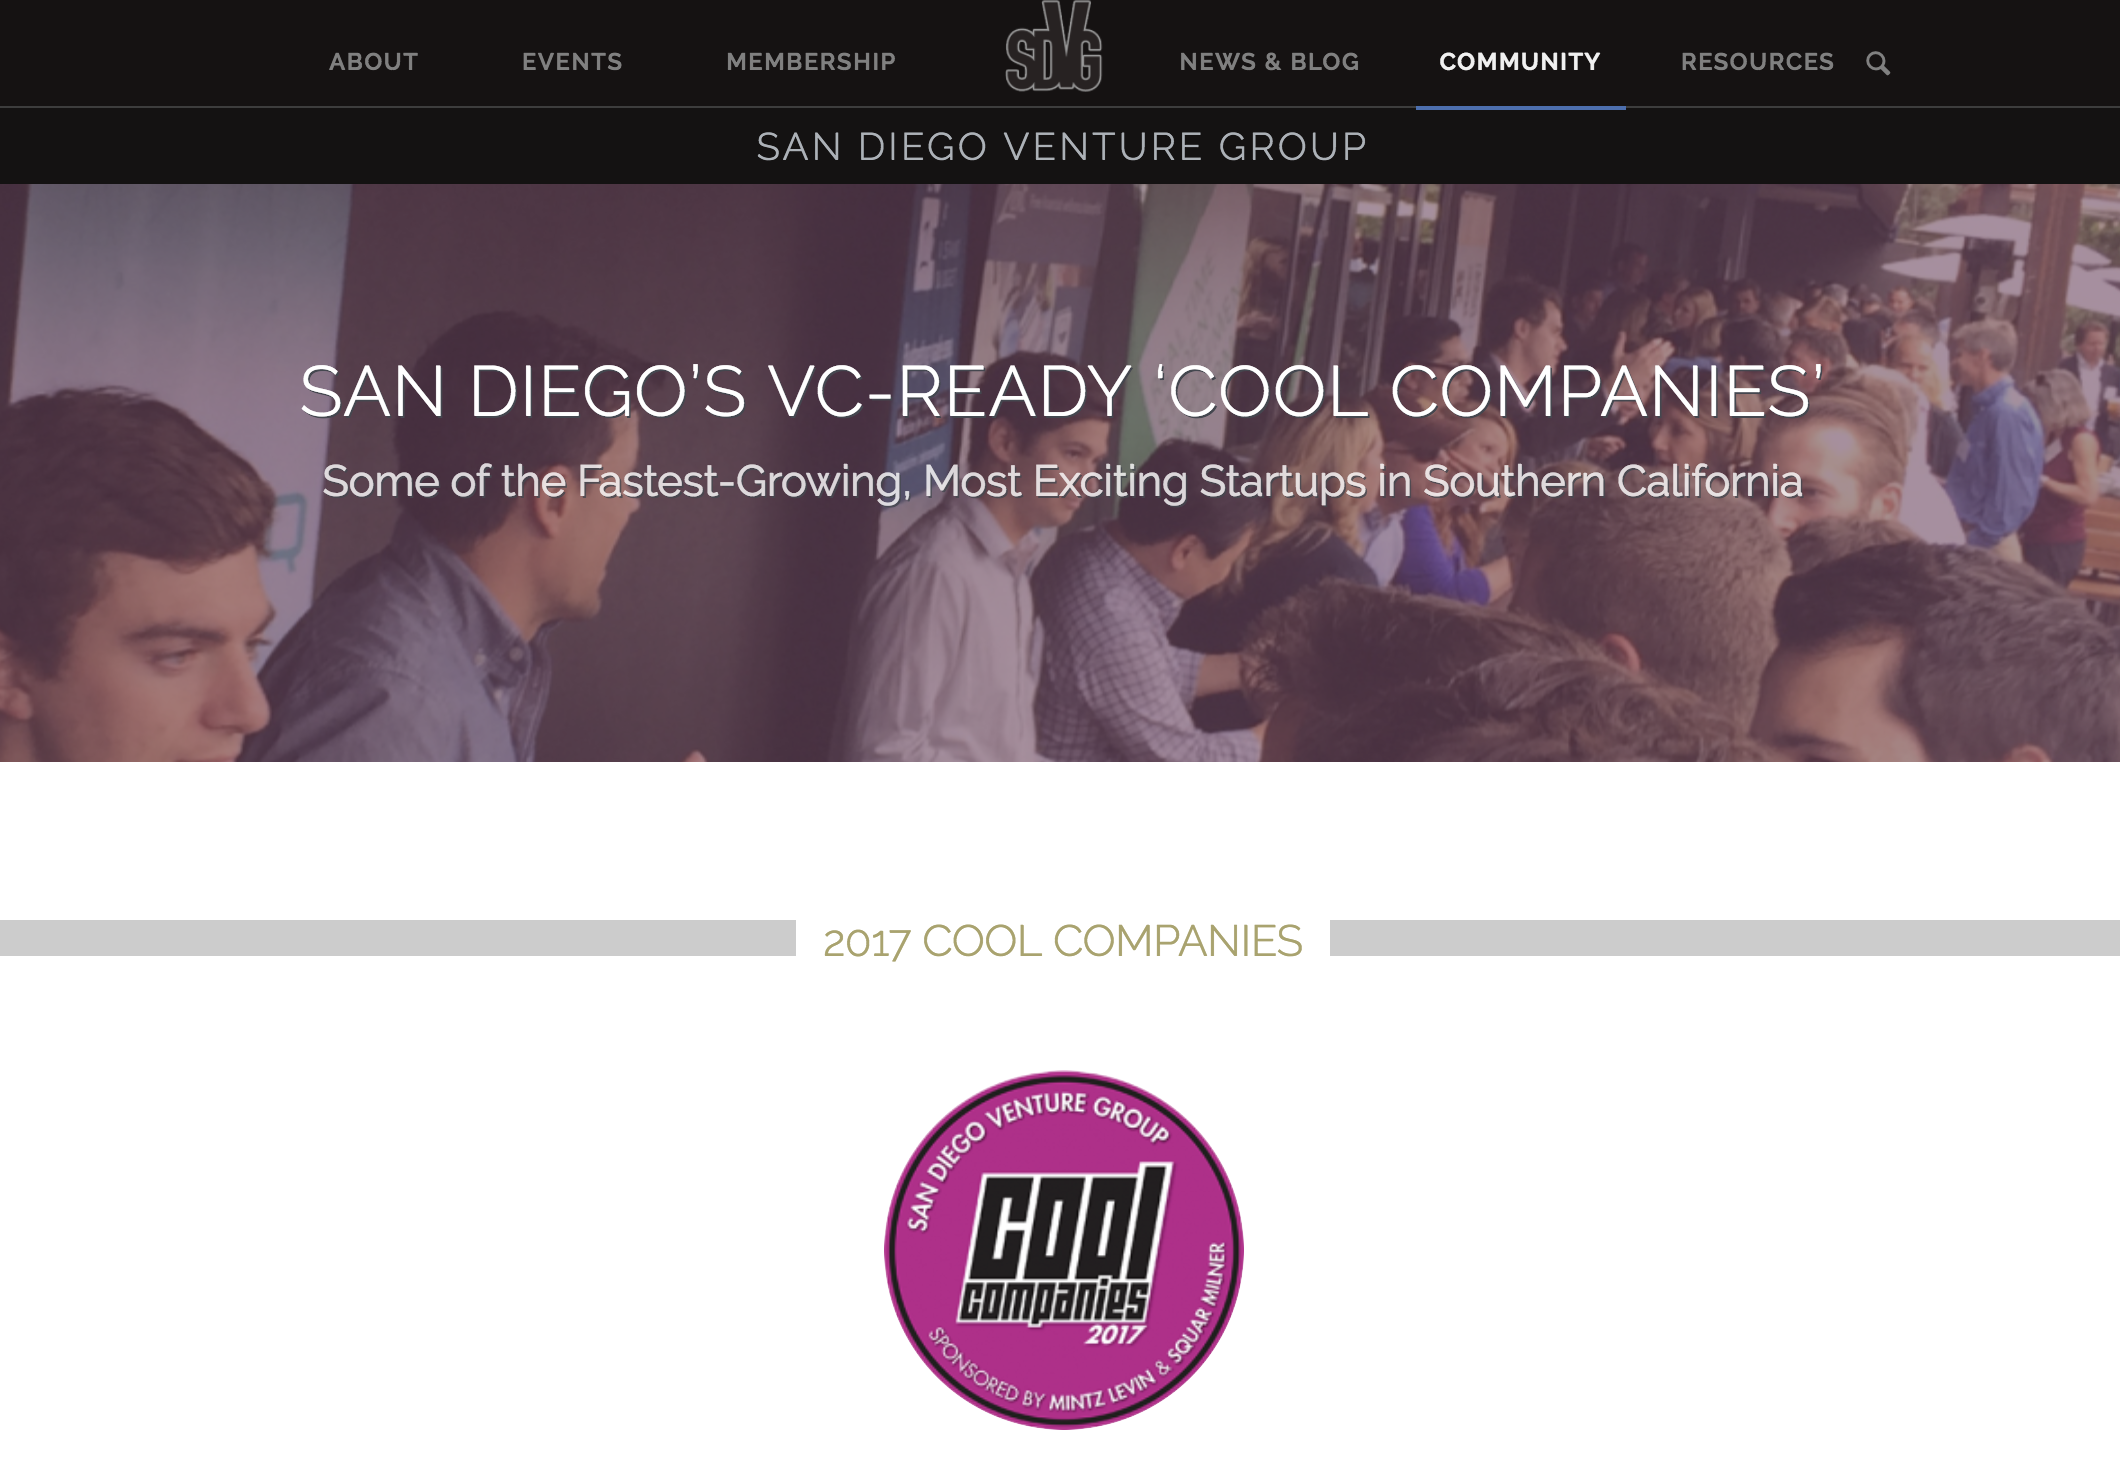 Veyo in San Diego Venture Group's Cool Company List